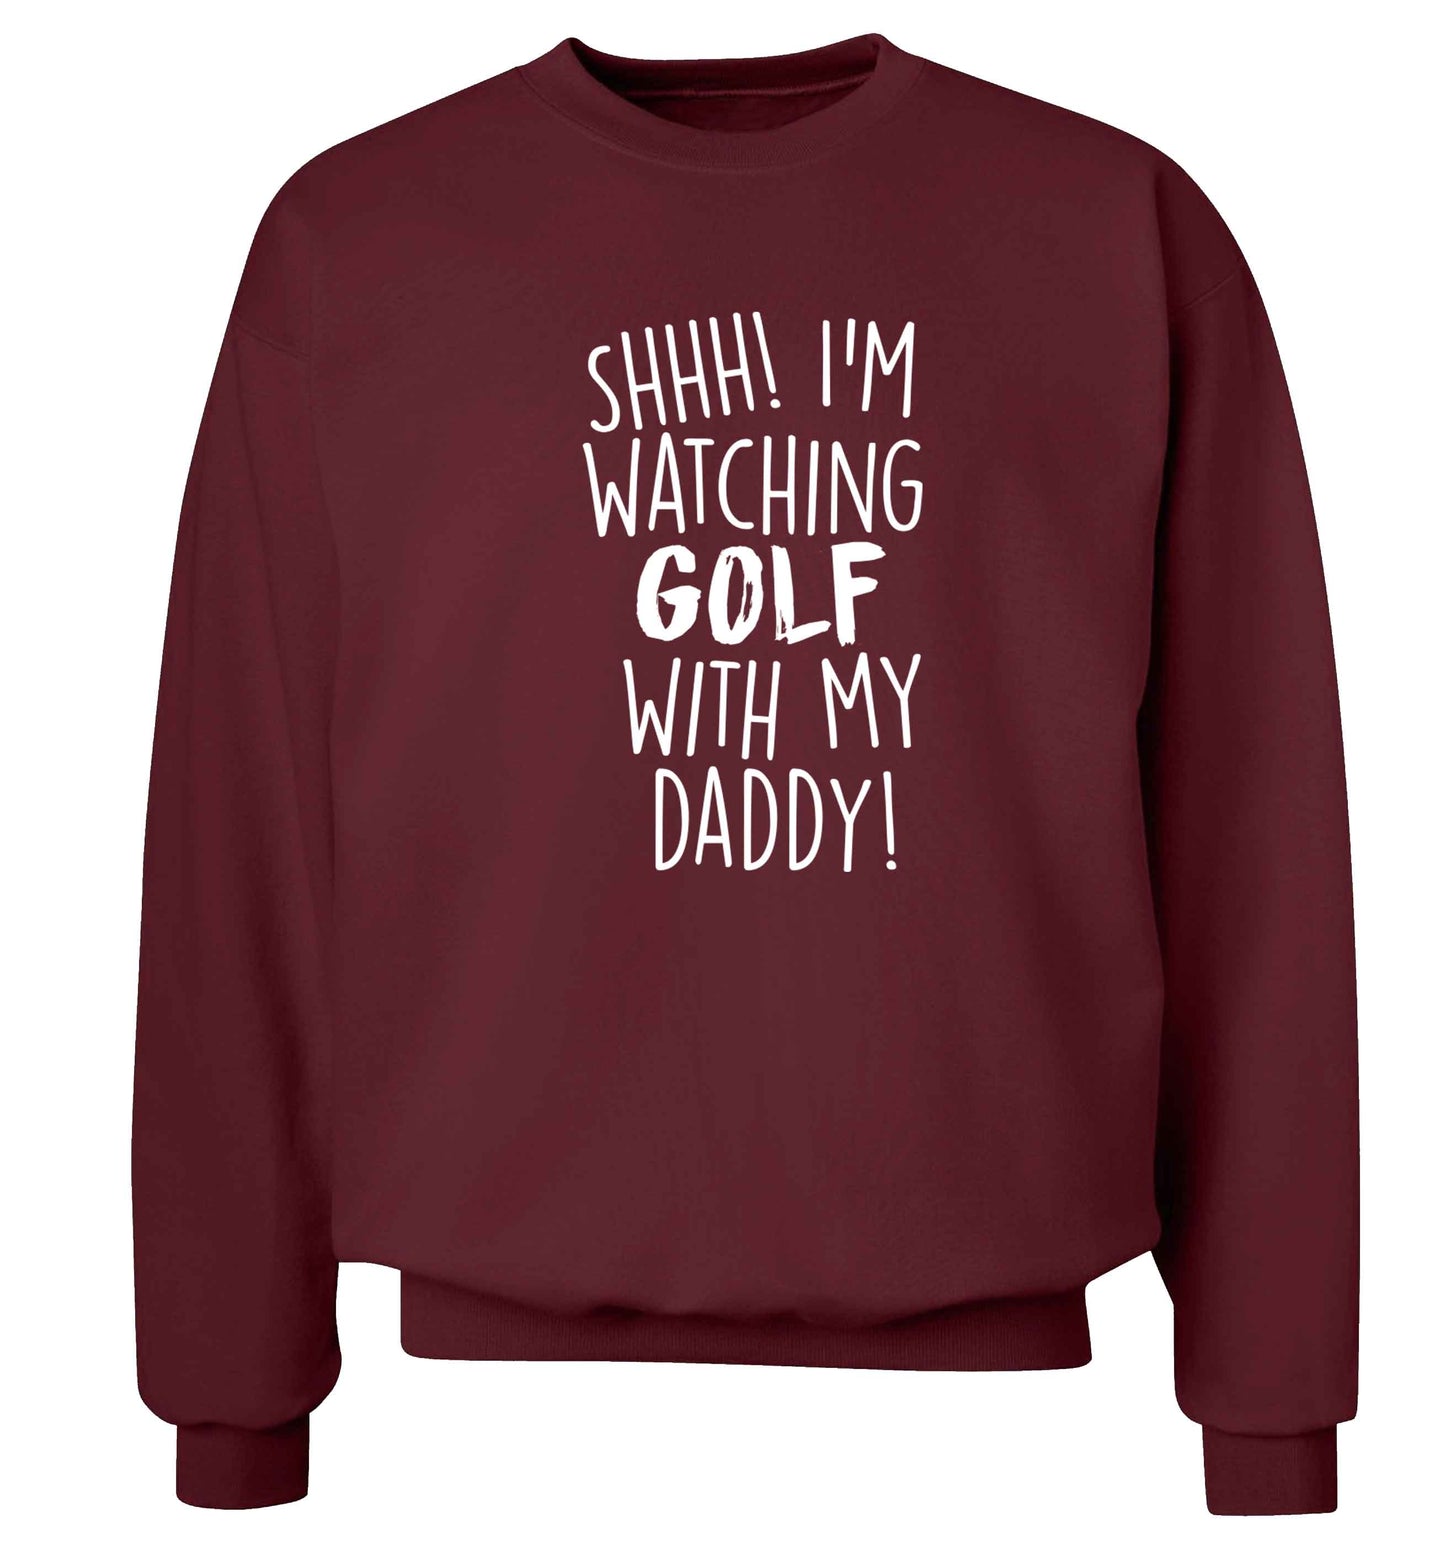 Shh I'm watching golf with my daddy Adult's unisex maroon Sweater 2XL